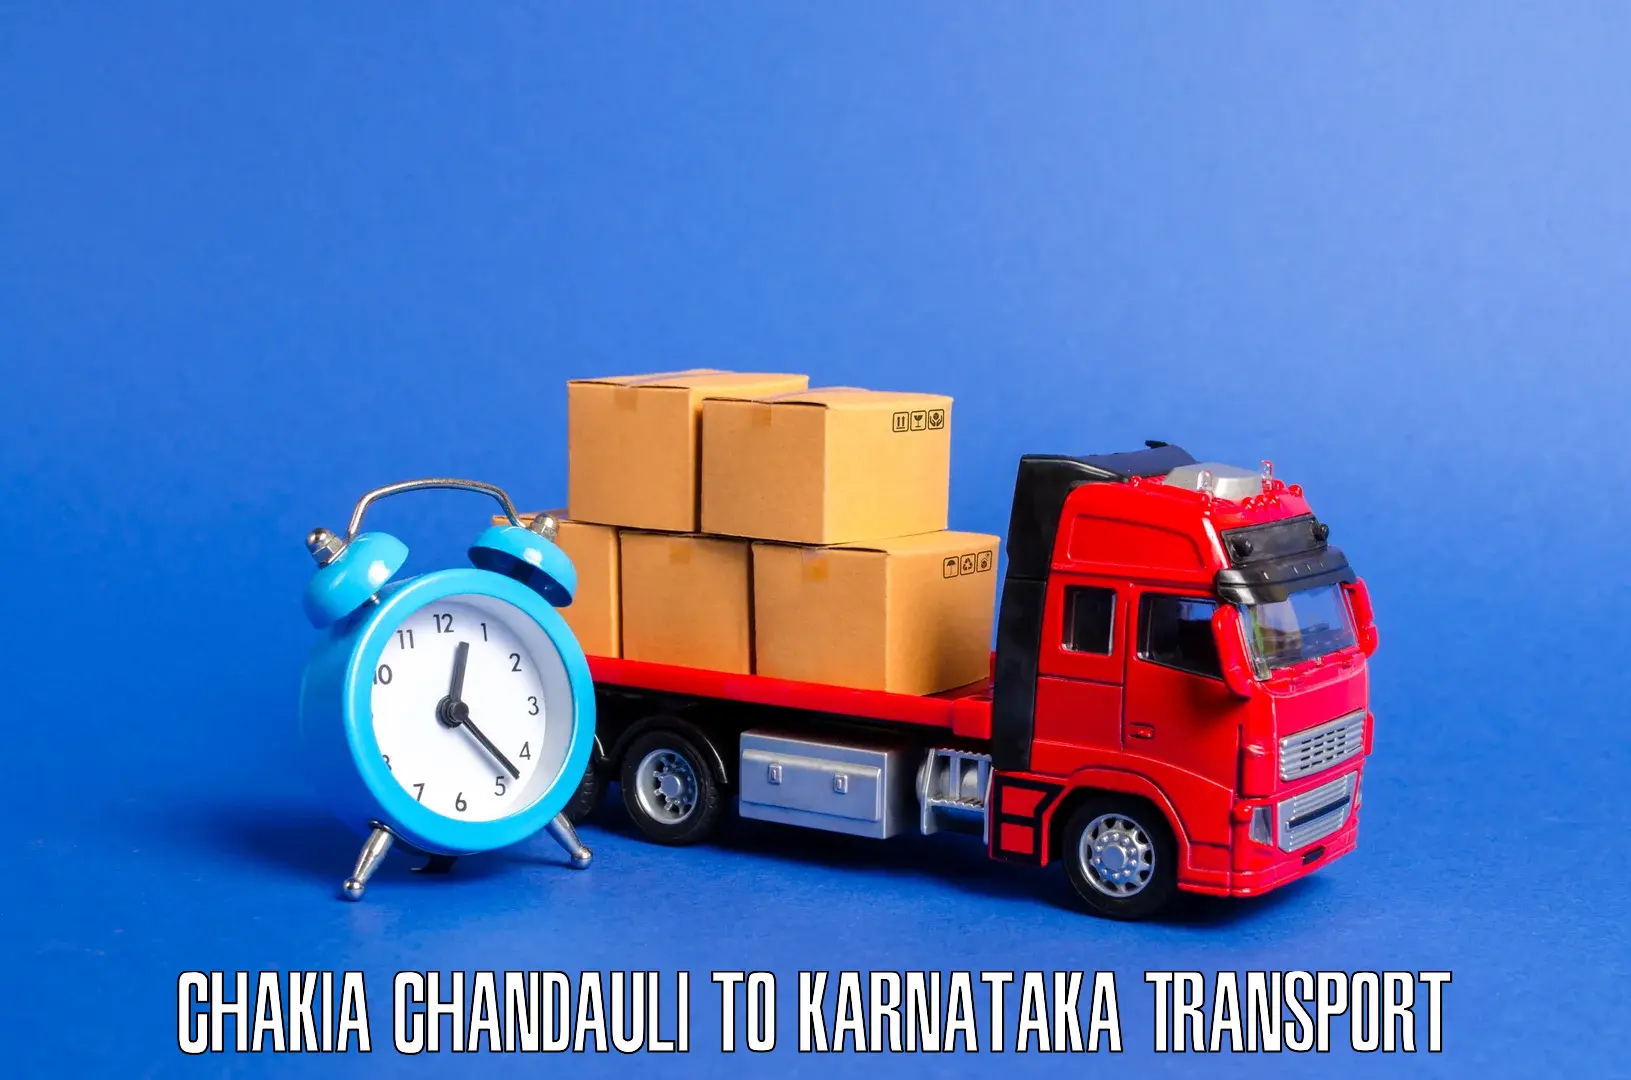 Air freight transport services Chakia Chandauli to Sirsi